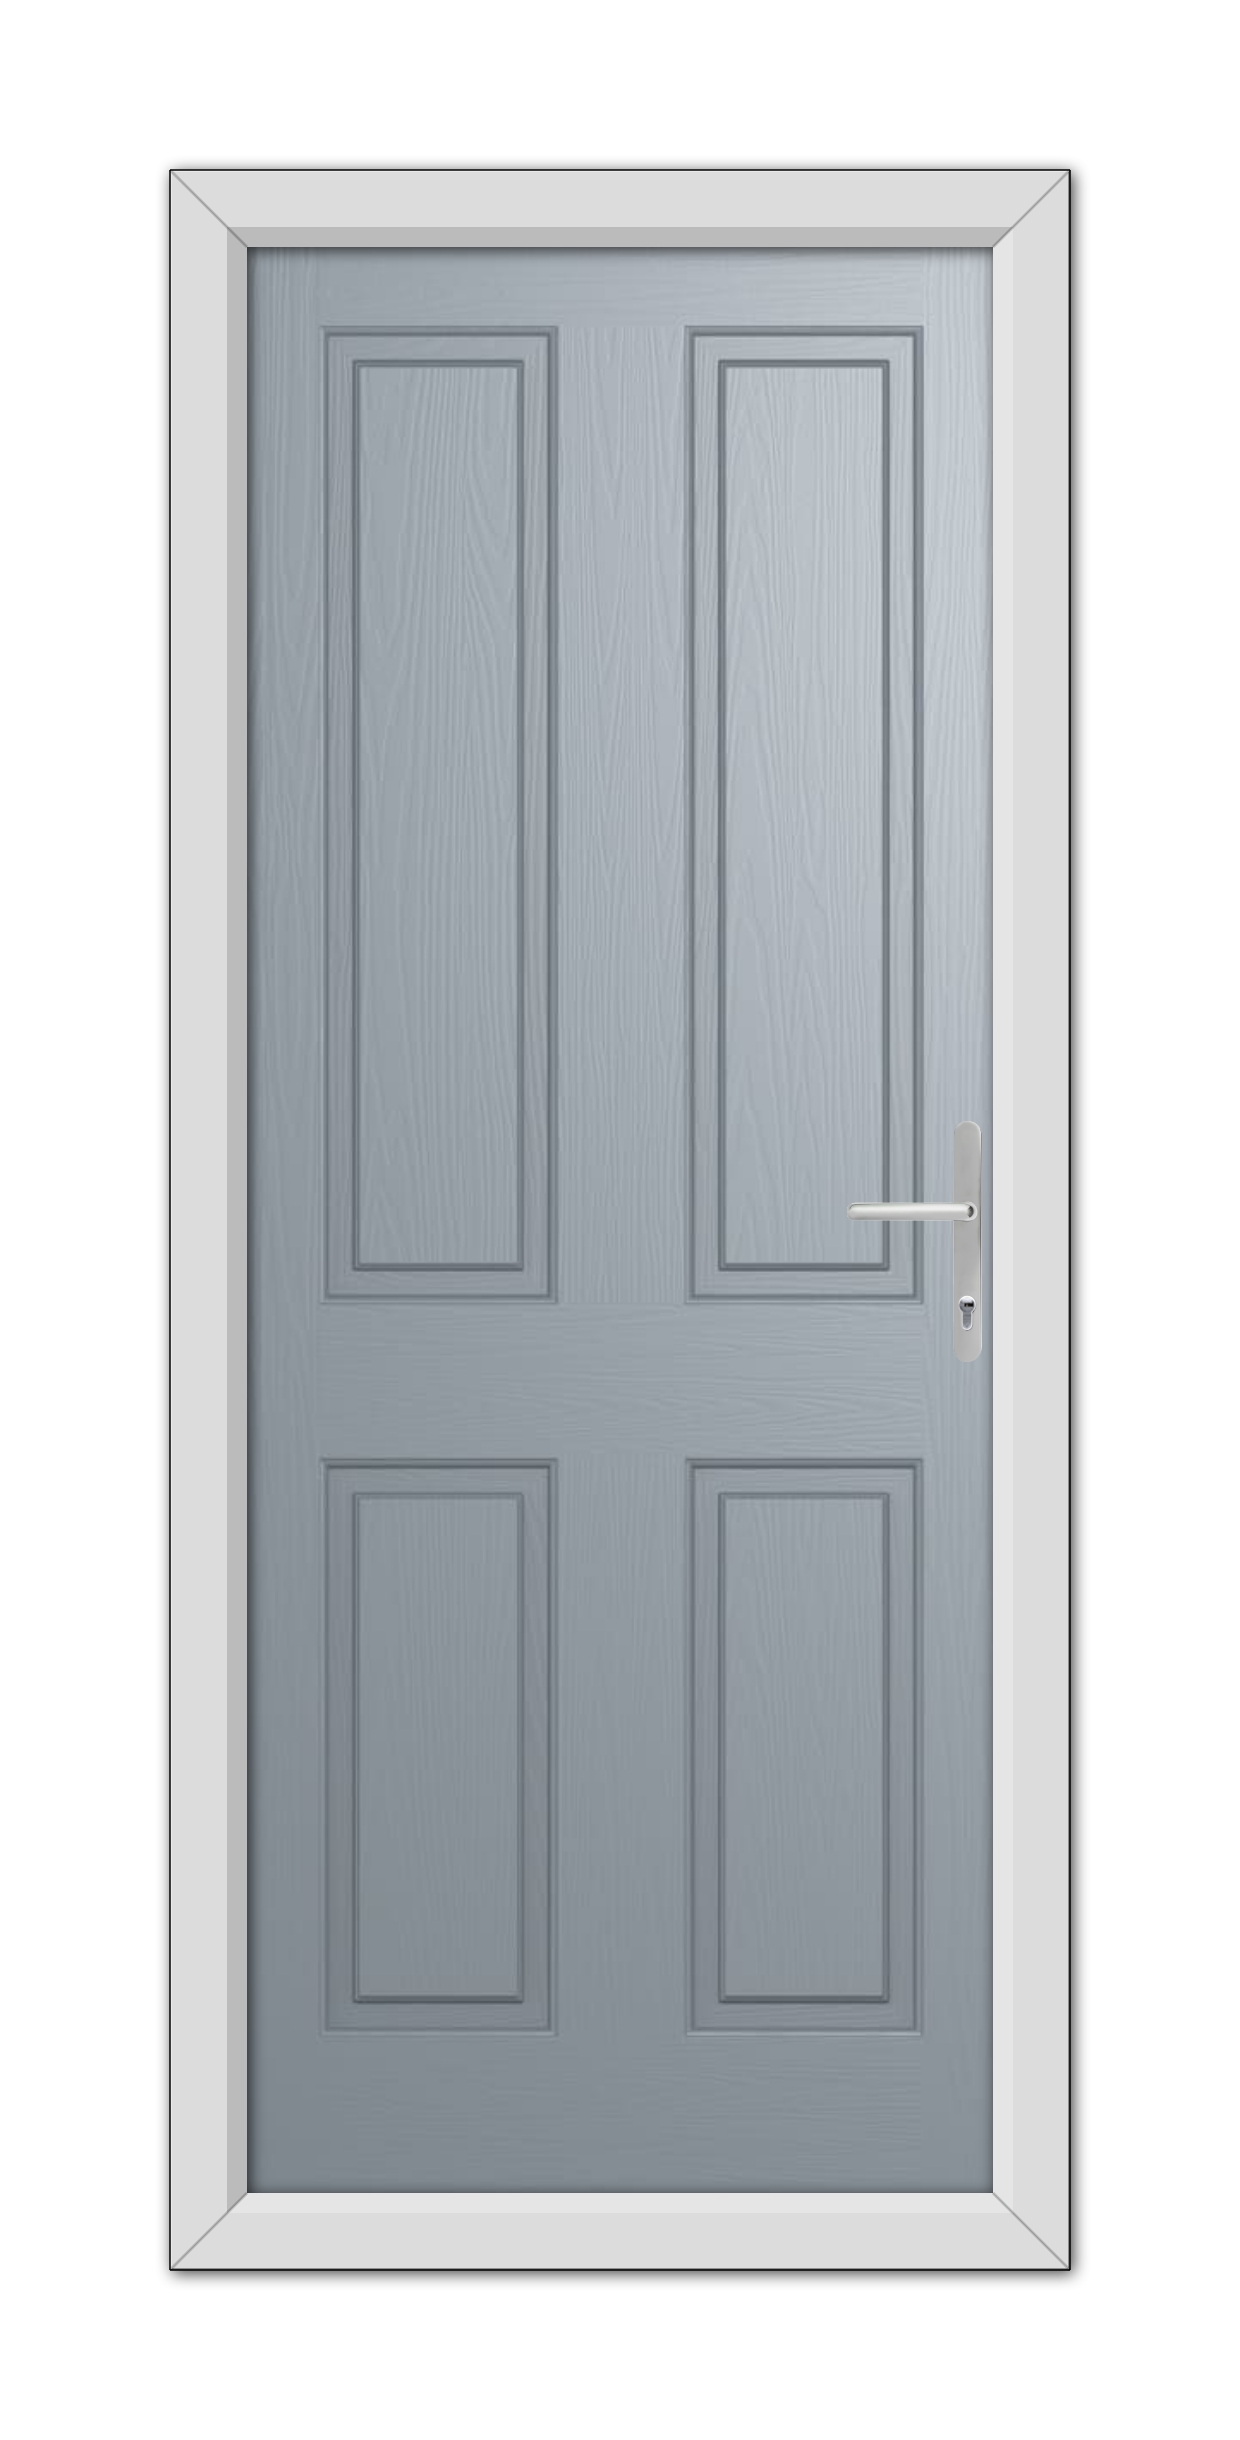 A modern French Grey Whitmore Solid Composite Door with six panels and a metallic handle, set within a white door frame.